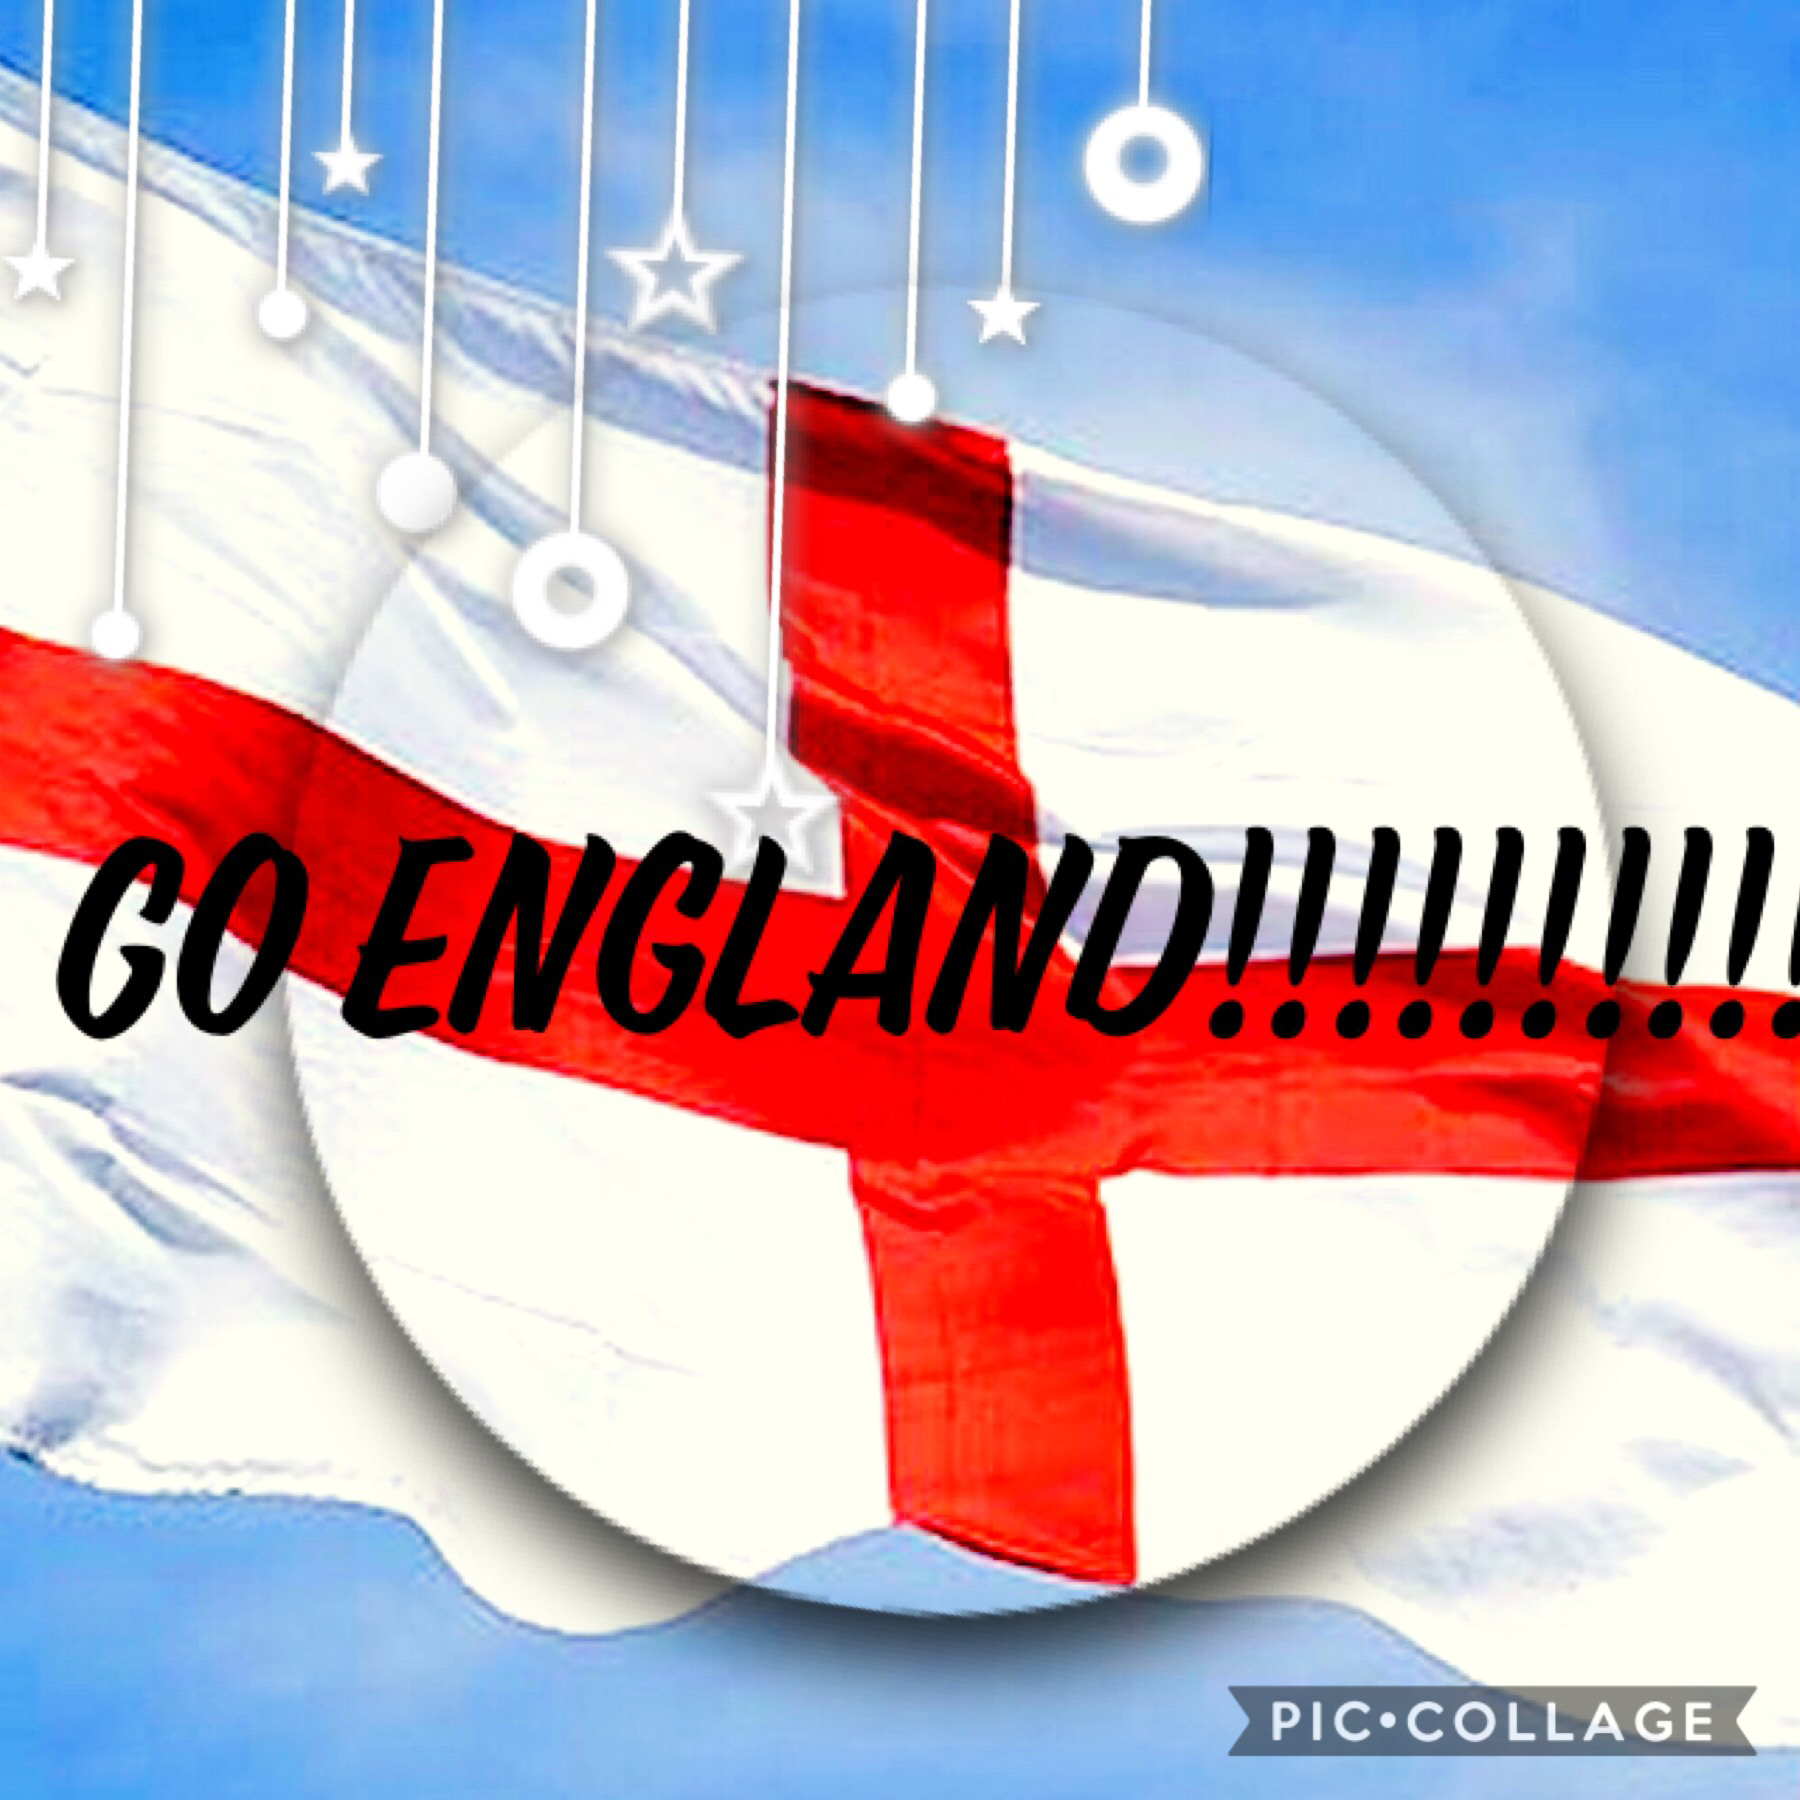 Go England!! I really hope they can win the World Cup!